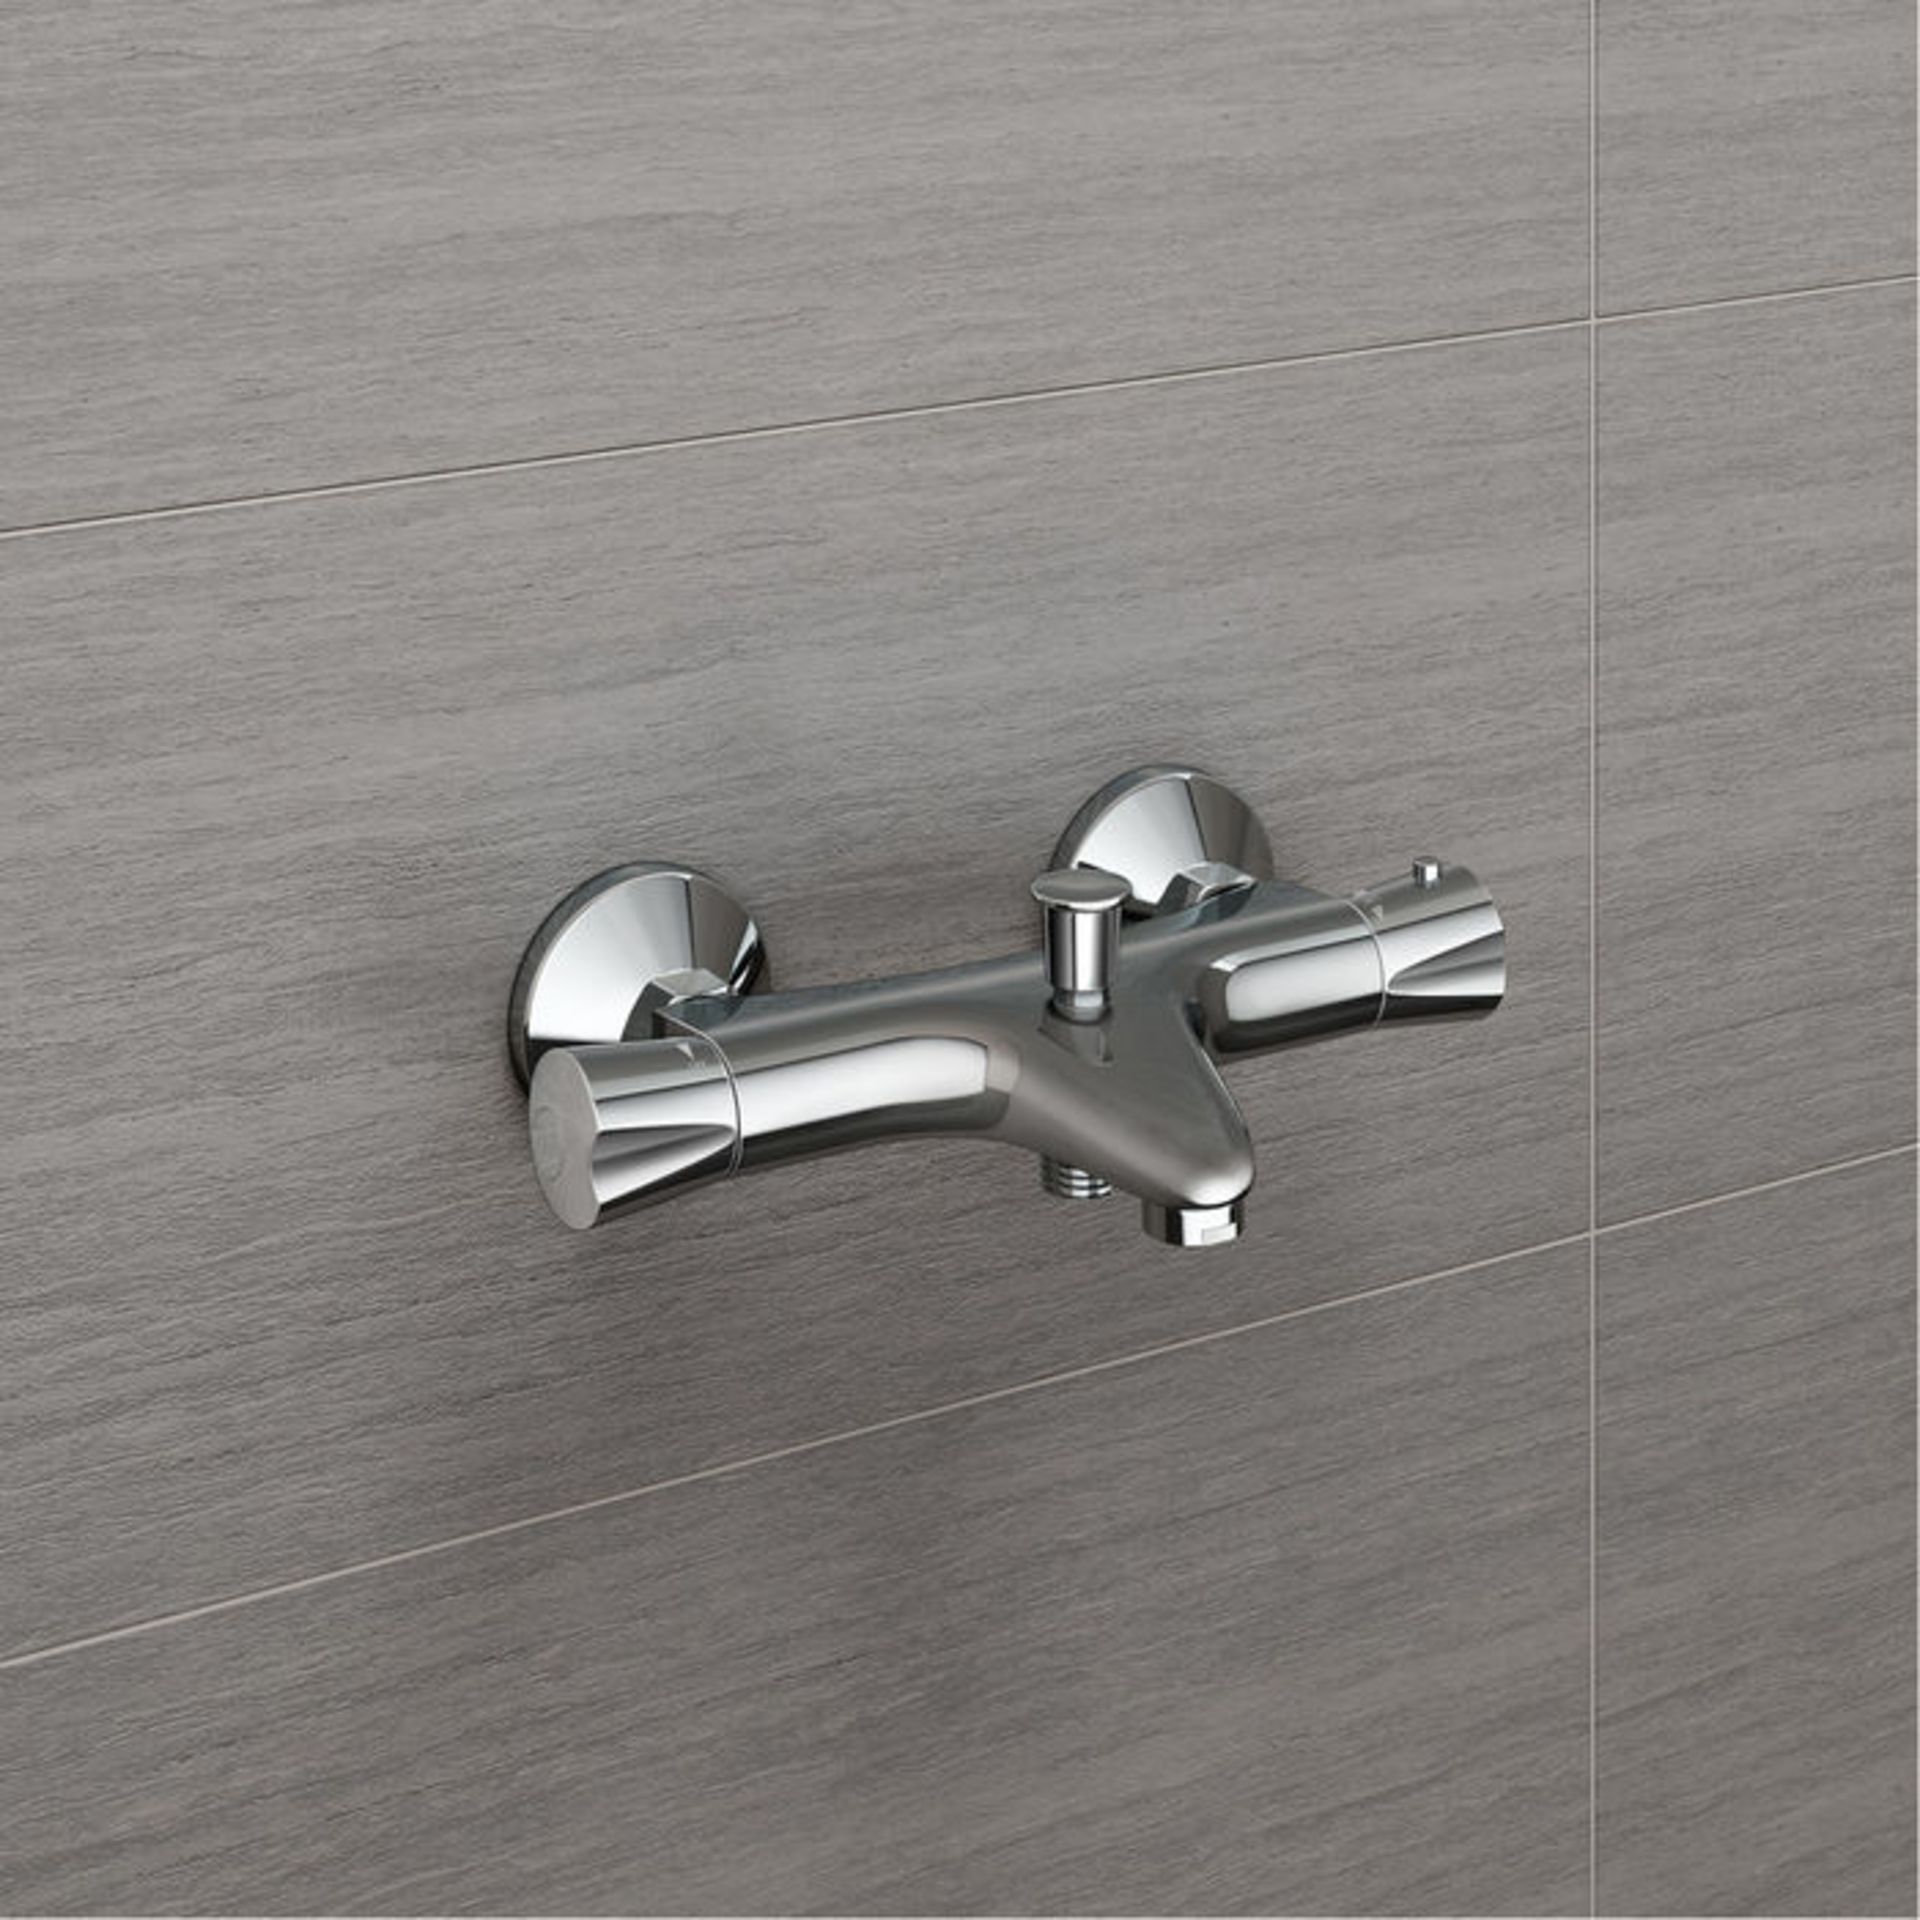 (V210) Shower Mixer Valve with Bath Filler RRP £124.99 Chrome Plated Solid Brass Mixer - Image 2 of 2